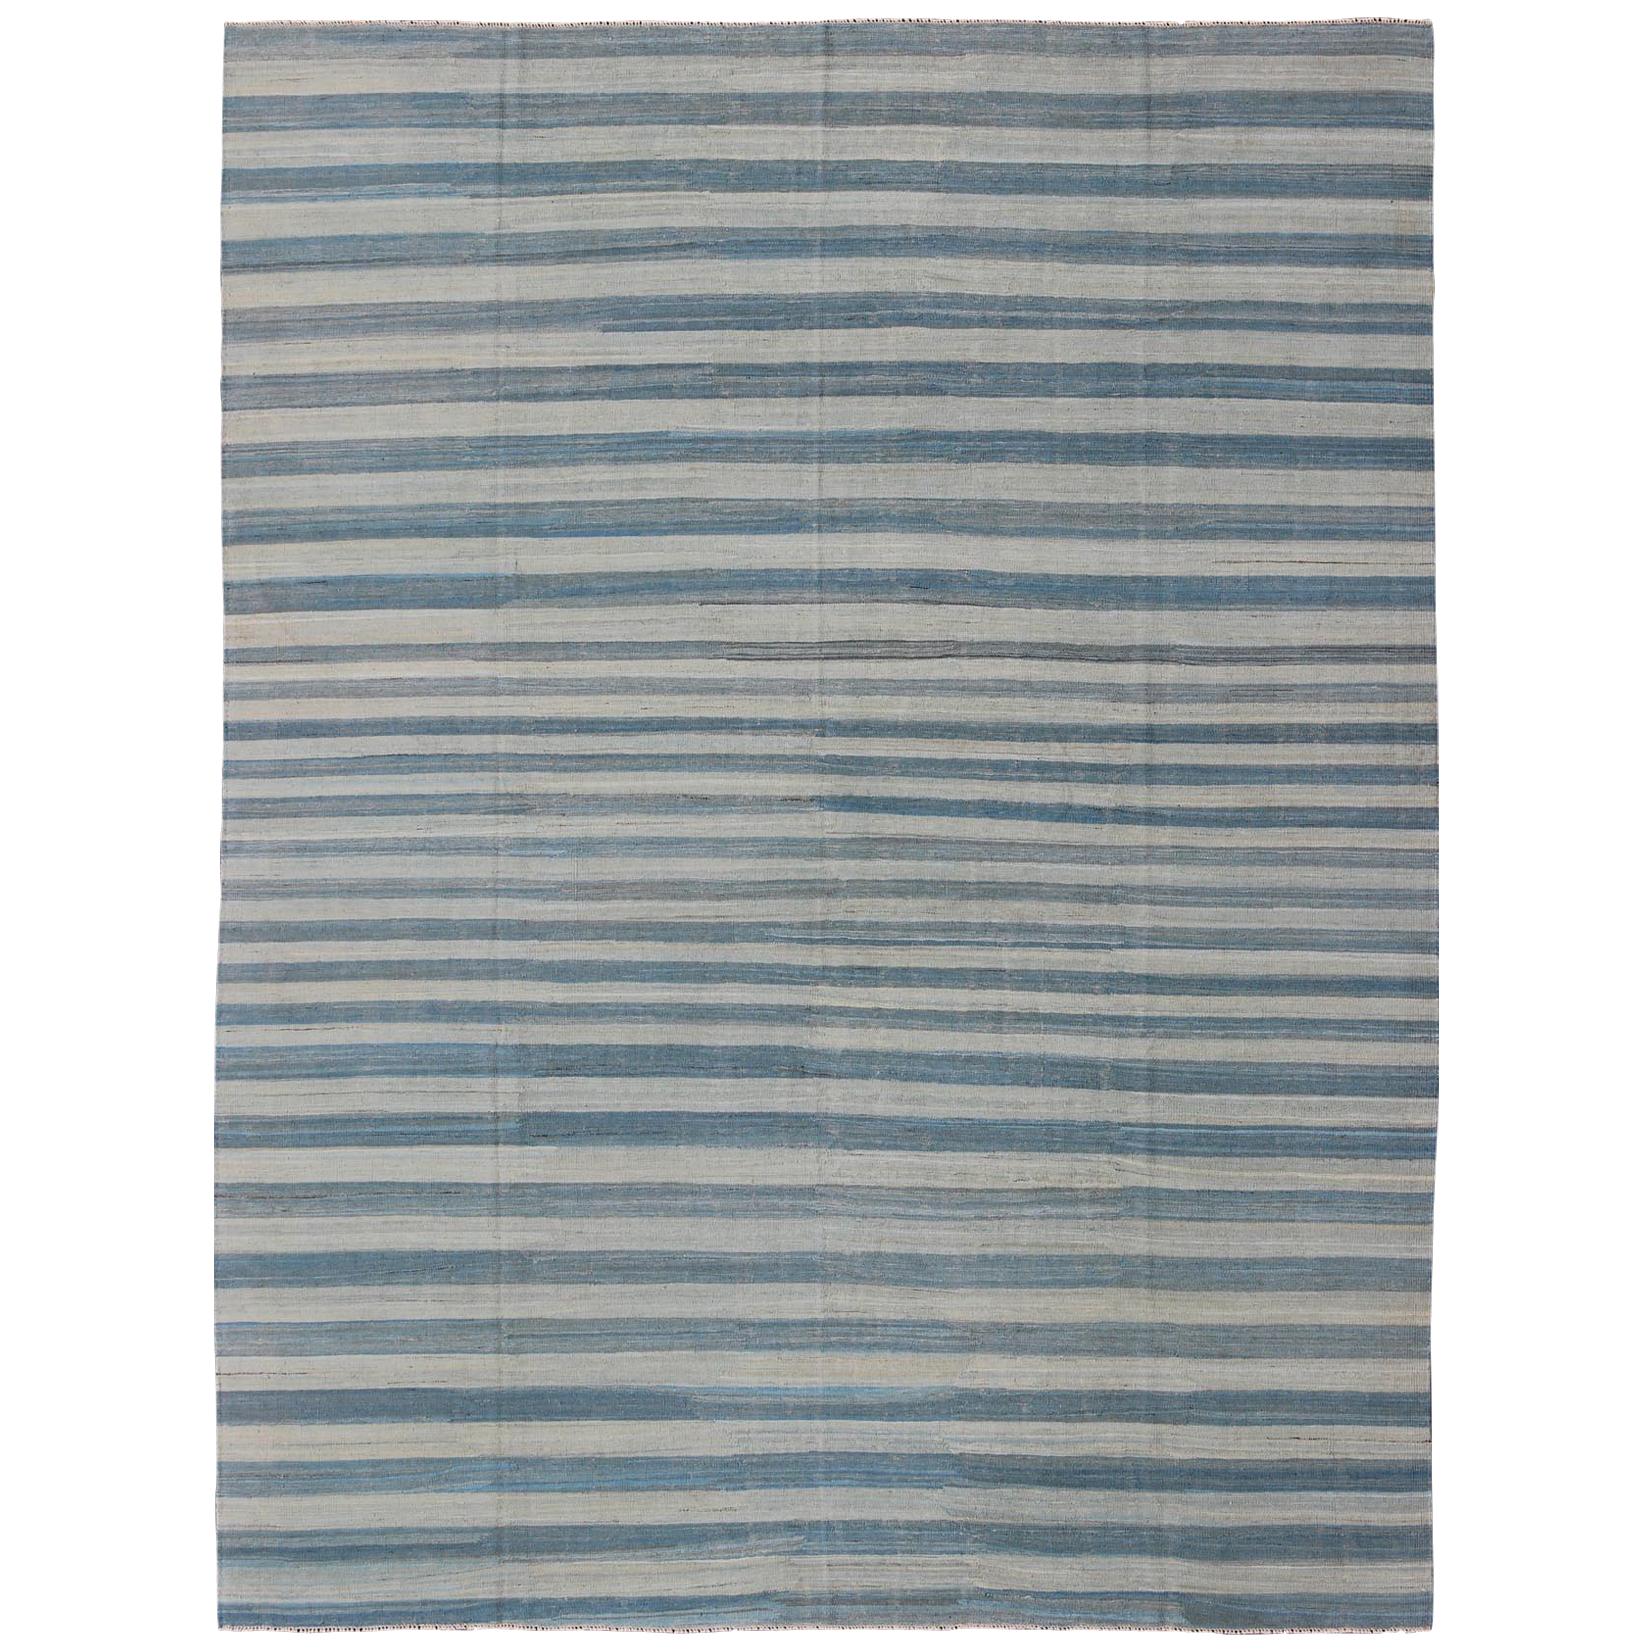 Flat-Weave Modern Kilim Rug with Stripes in Shades of Blue, Taupe Gray and Ivory